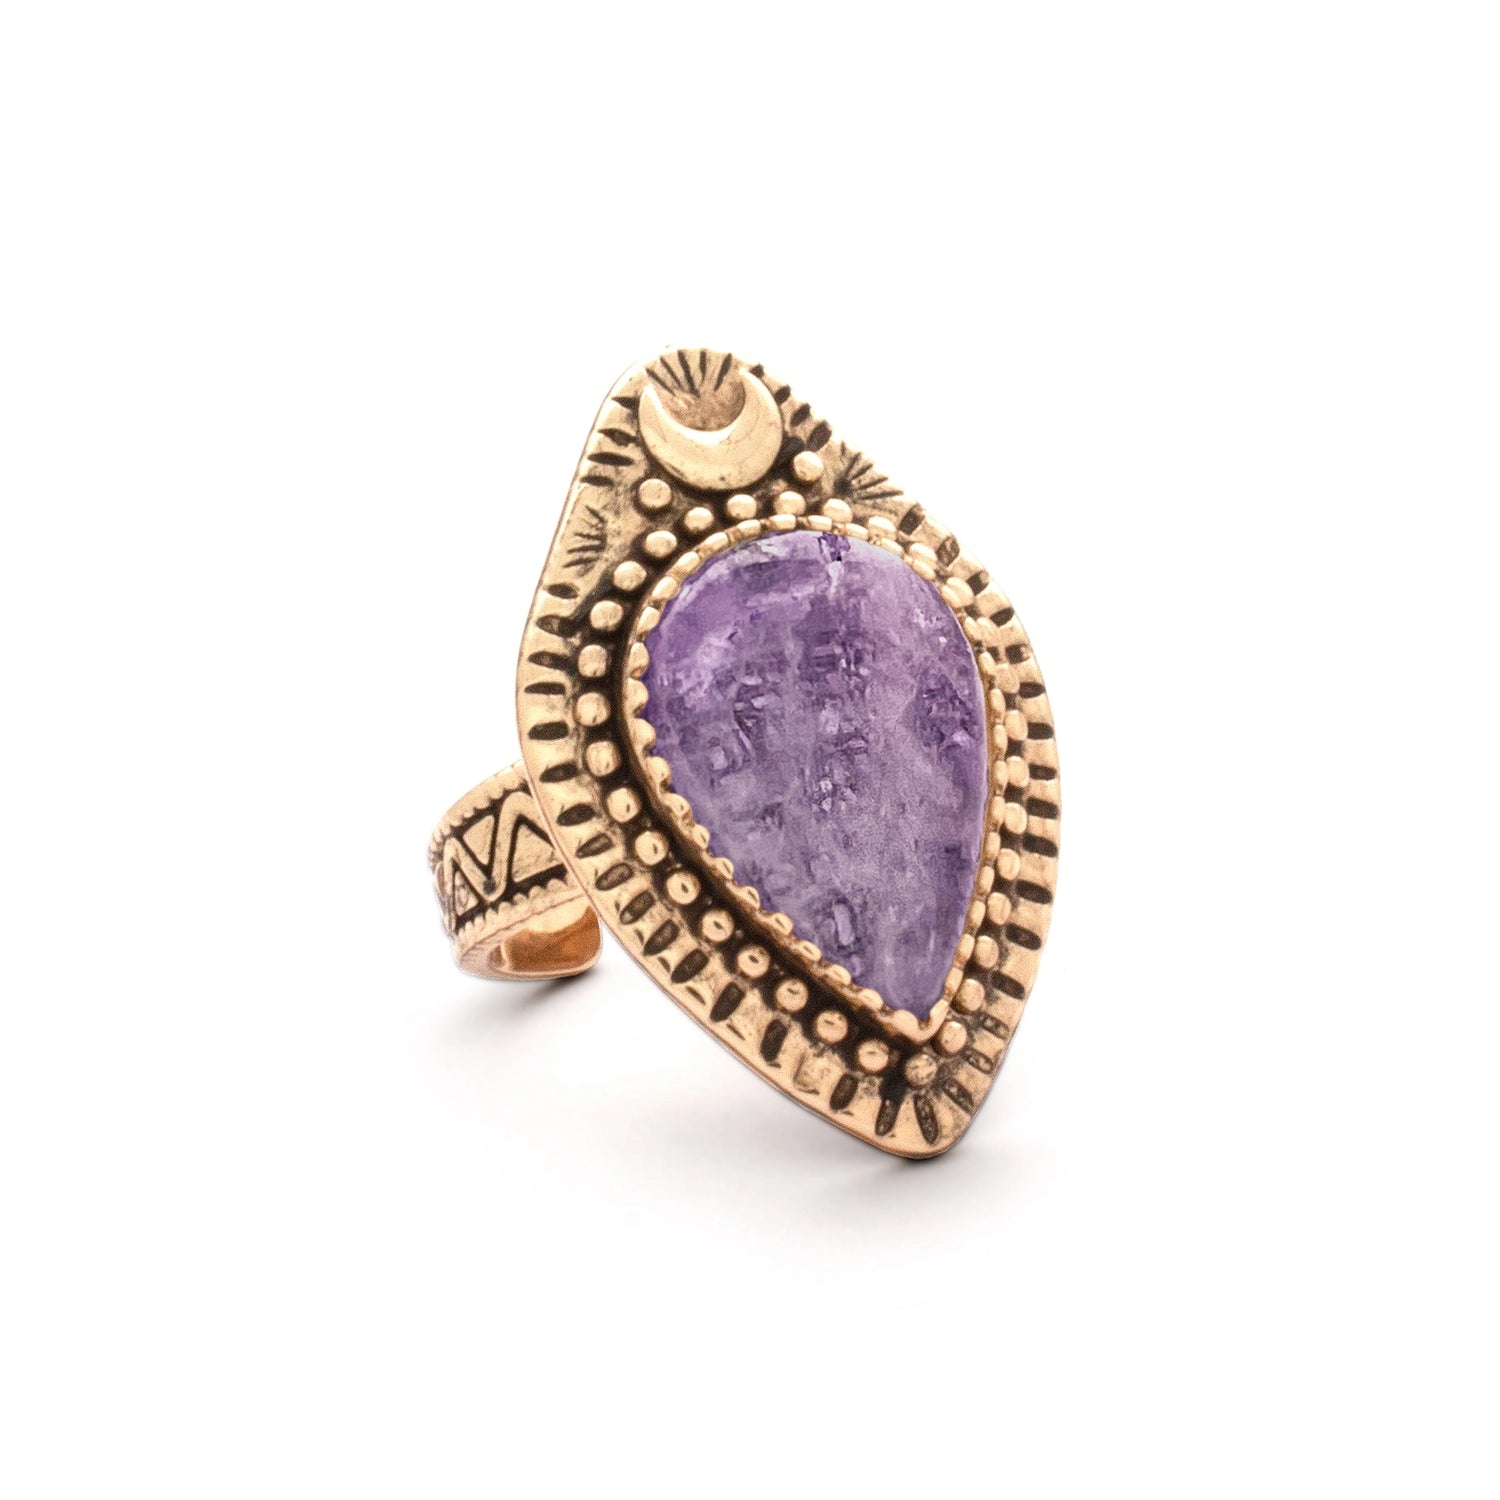 Moonlight Ring | Amethyst | Gold Plated Brass - Moon Room Shop and Wellness